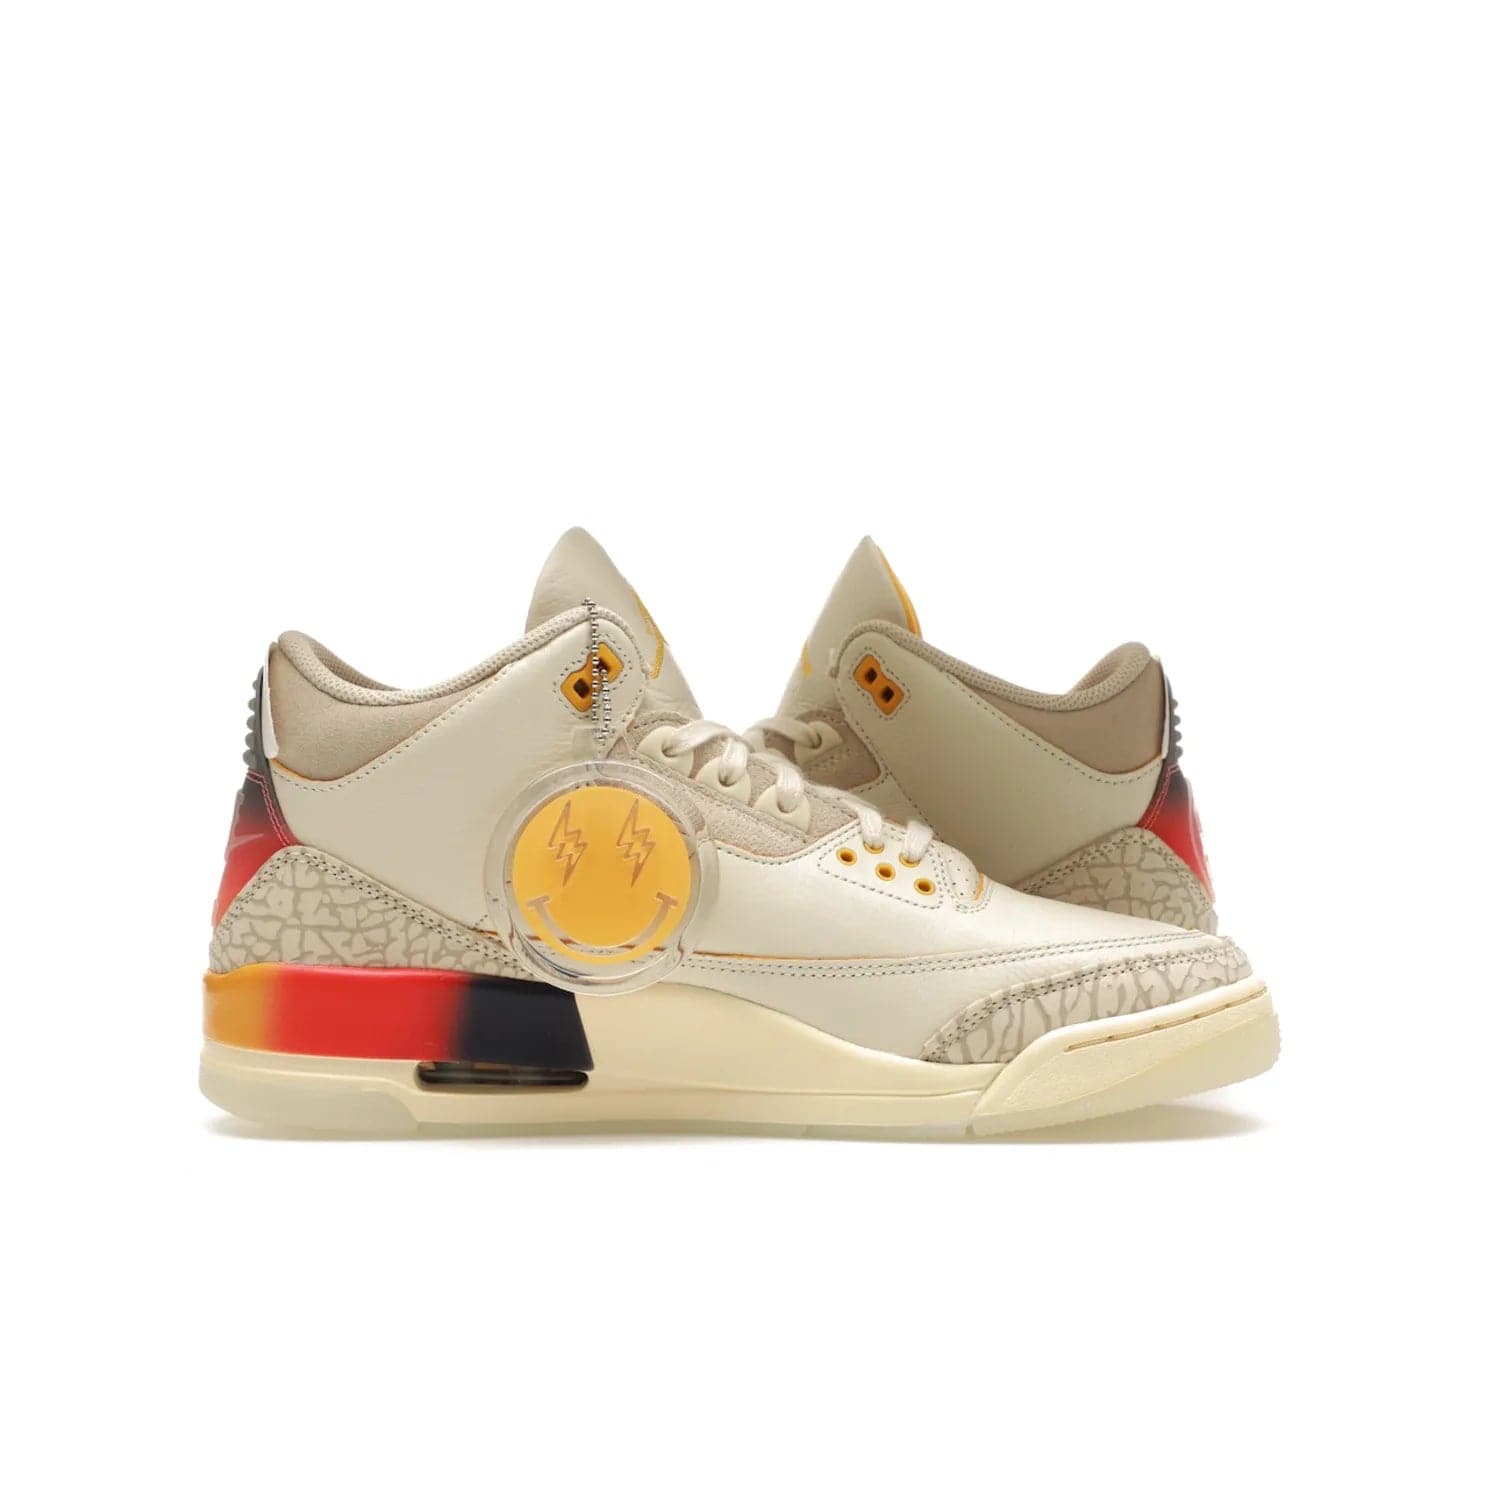 Jordan 3 Retro SP J Balvin Medellín Sunset - Image 19 - Only at www.BallersClubKickz.com - J Balvin x Jordan 3 Retro SP: Celebrate the joy of life with a colorful, homage to the electrifying reggaeton culture and iconic Jordan 3. Limited edition, Sept. 23. $250.